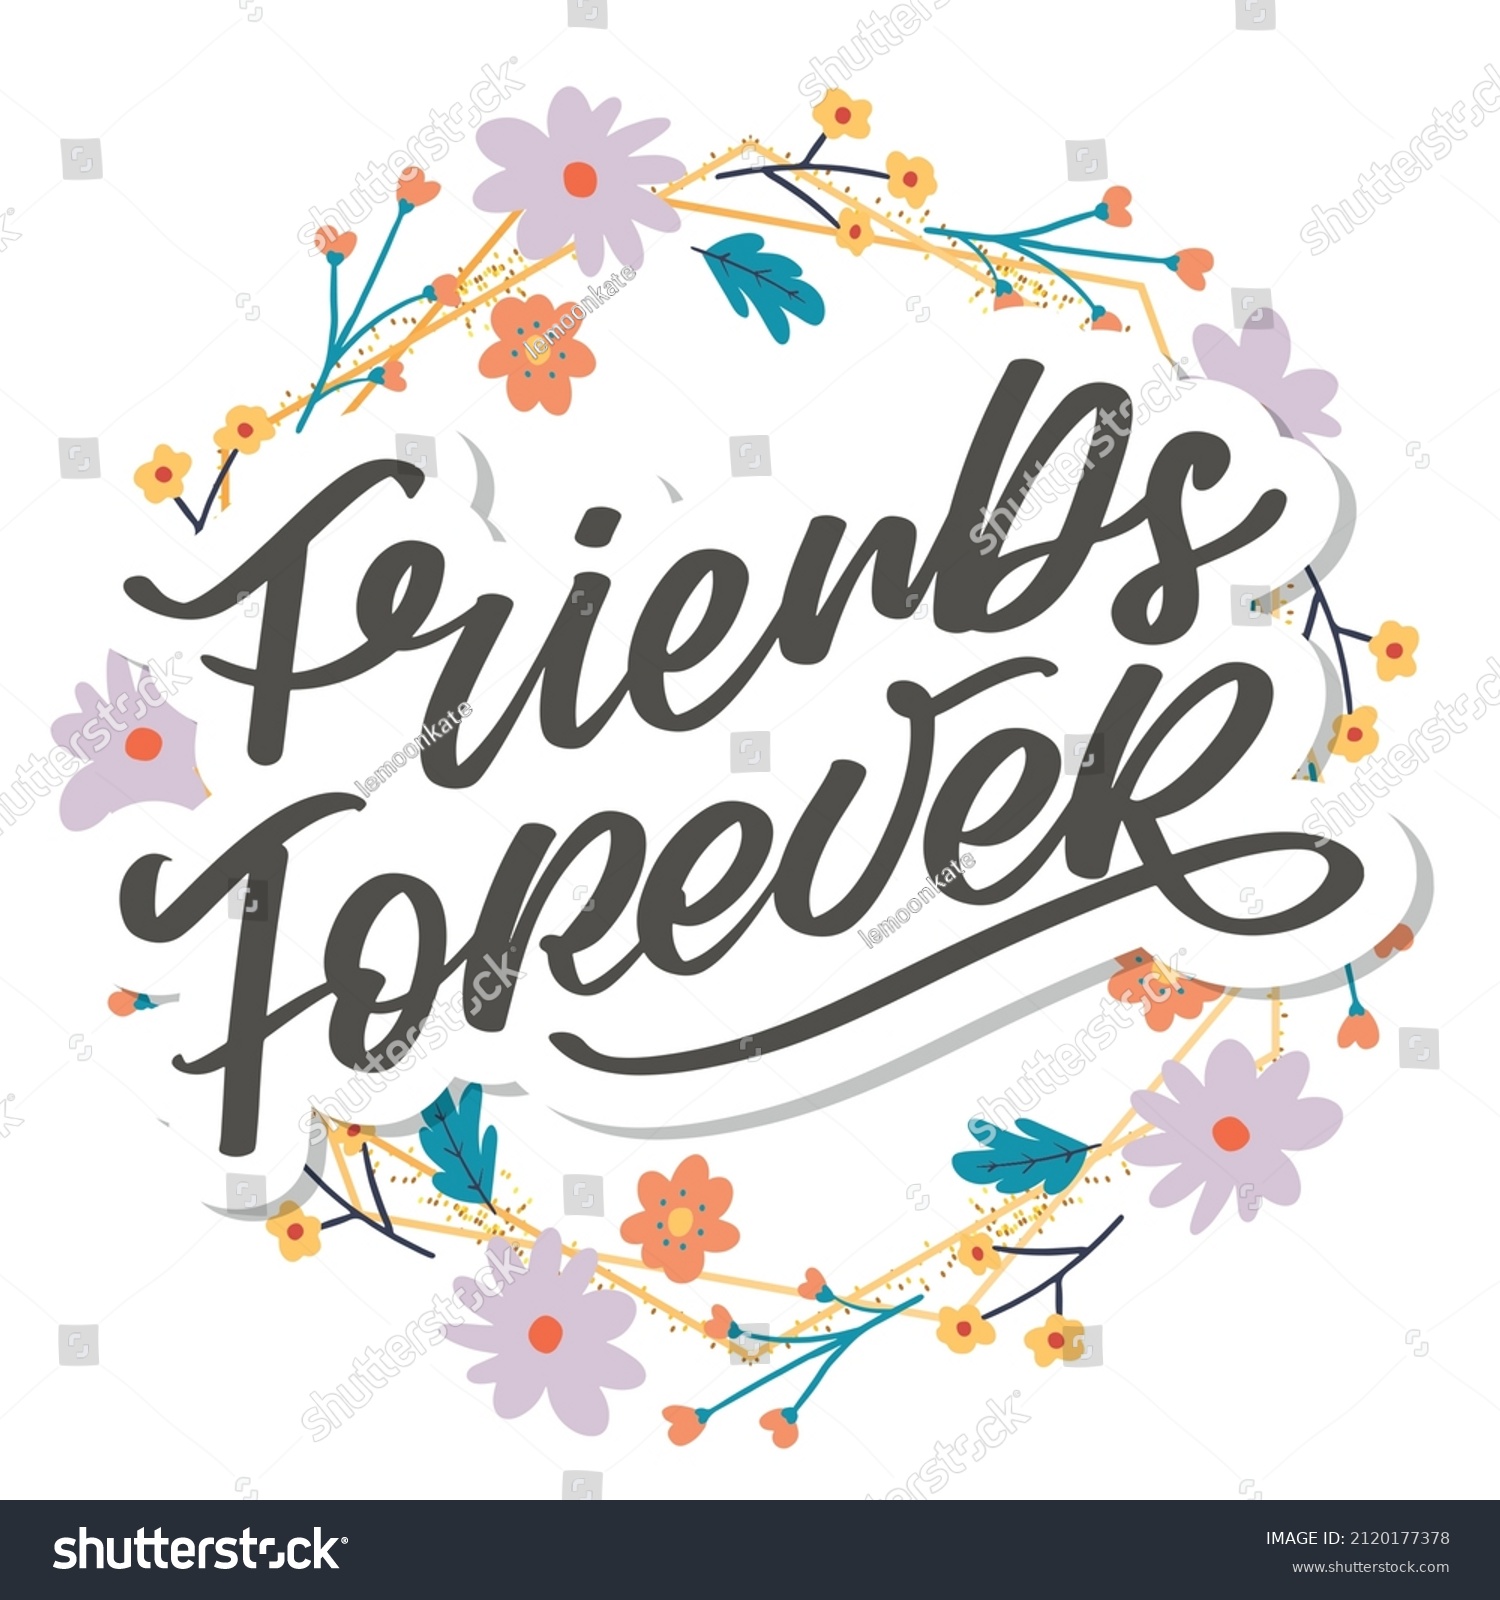 SVG of Best Friend Forever Friendship Day soul sister with heart lettering design best friend forever bff besties svg